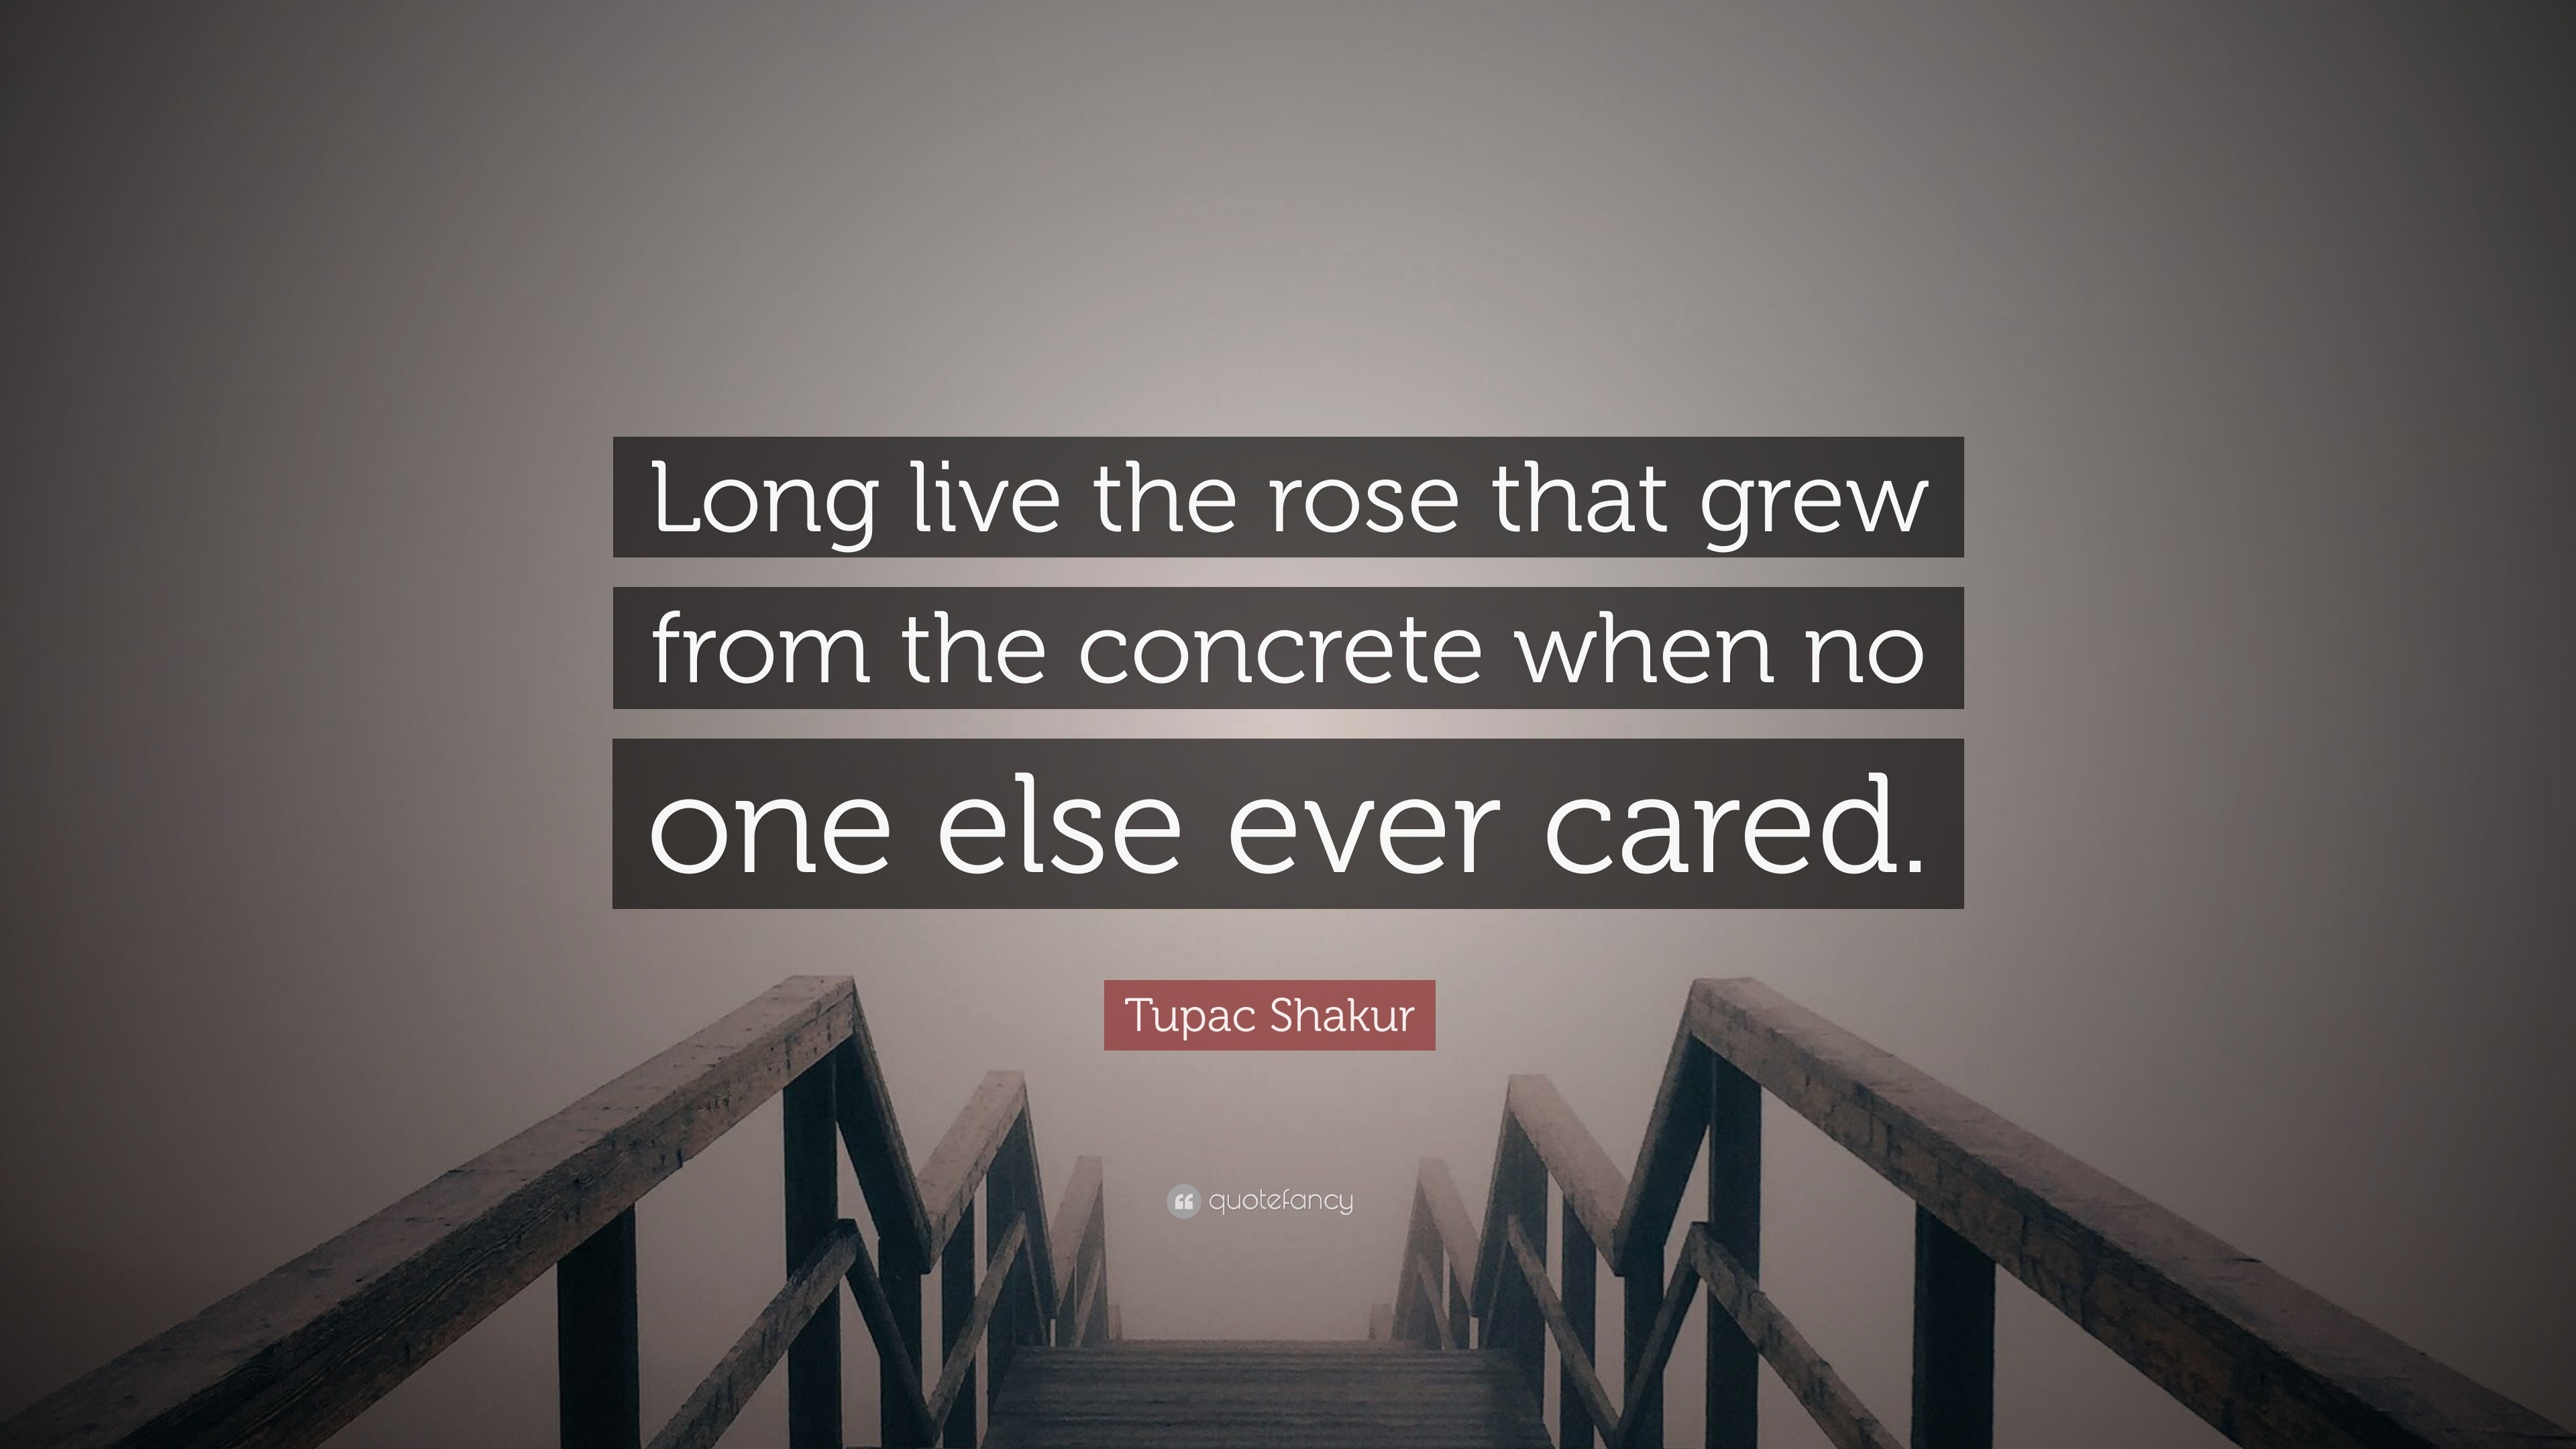 Tupac Shakur Quote Long Live The Rose That Grew From The Concrete When No One Else